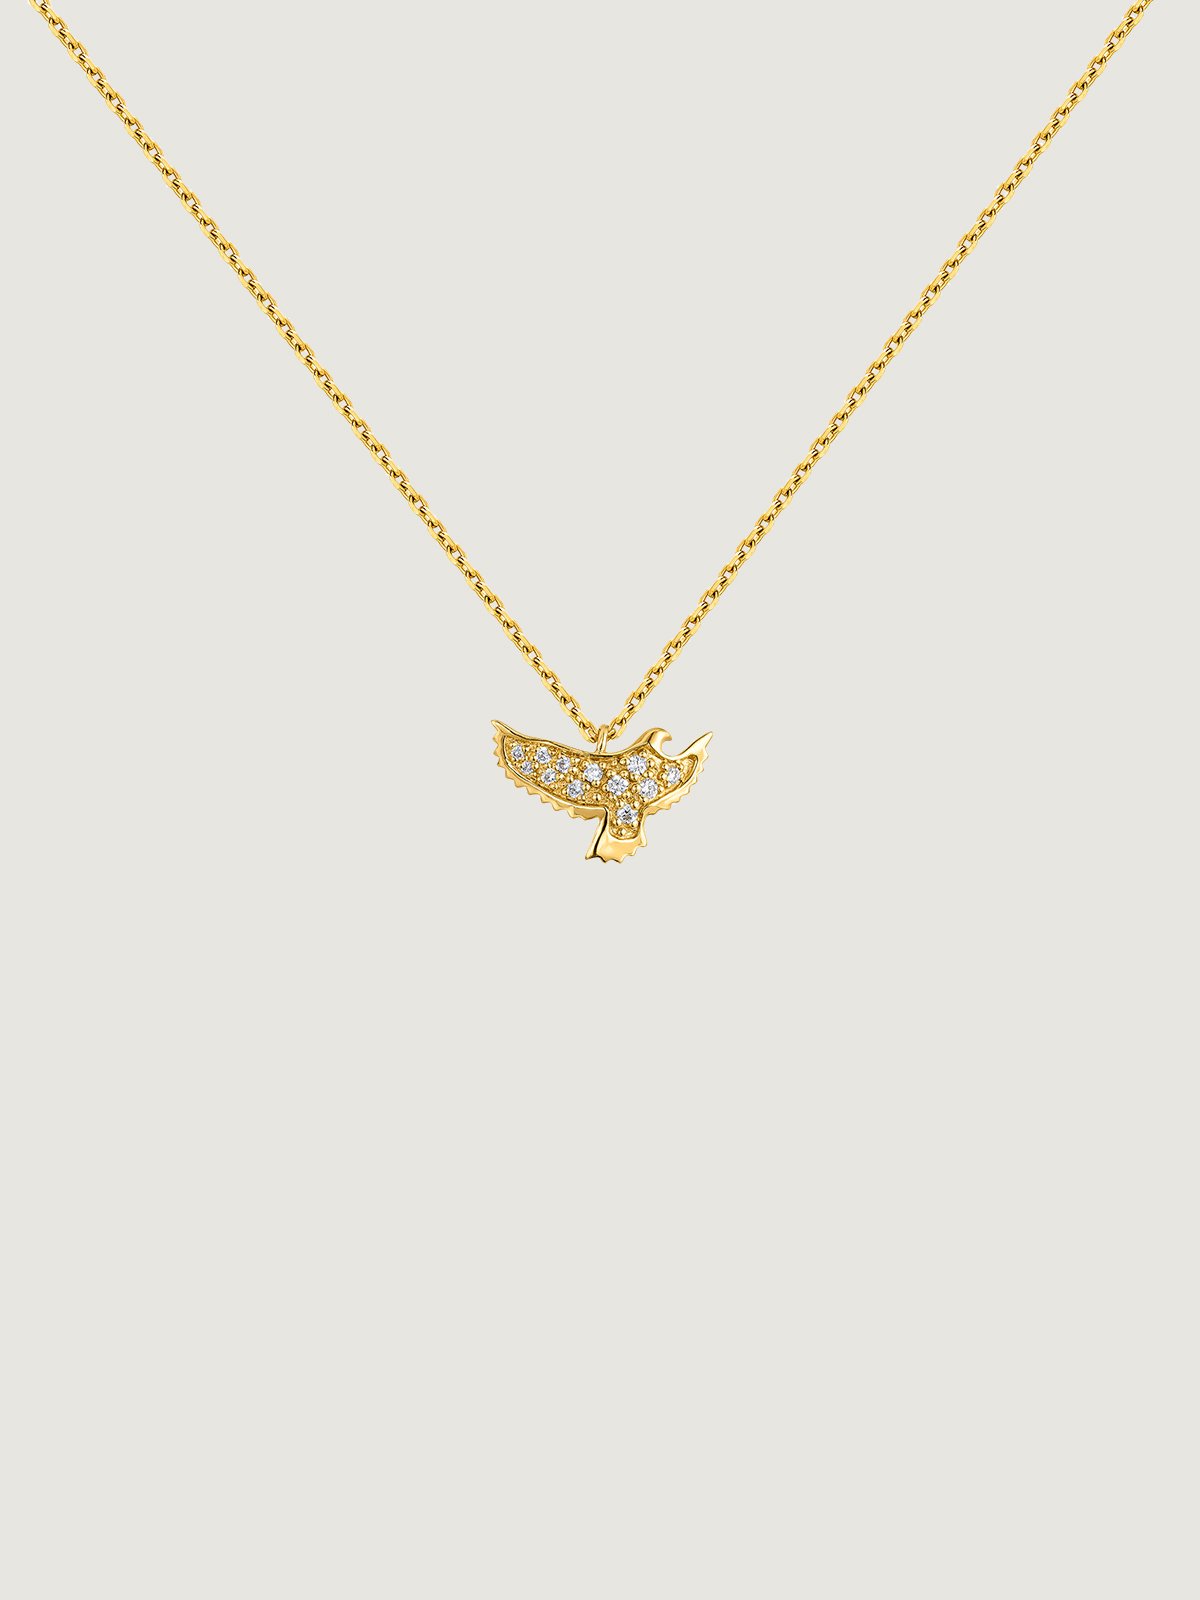 18K yellow gold pendant in the shape of an eagle with diamonds